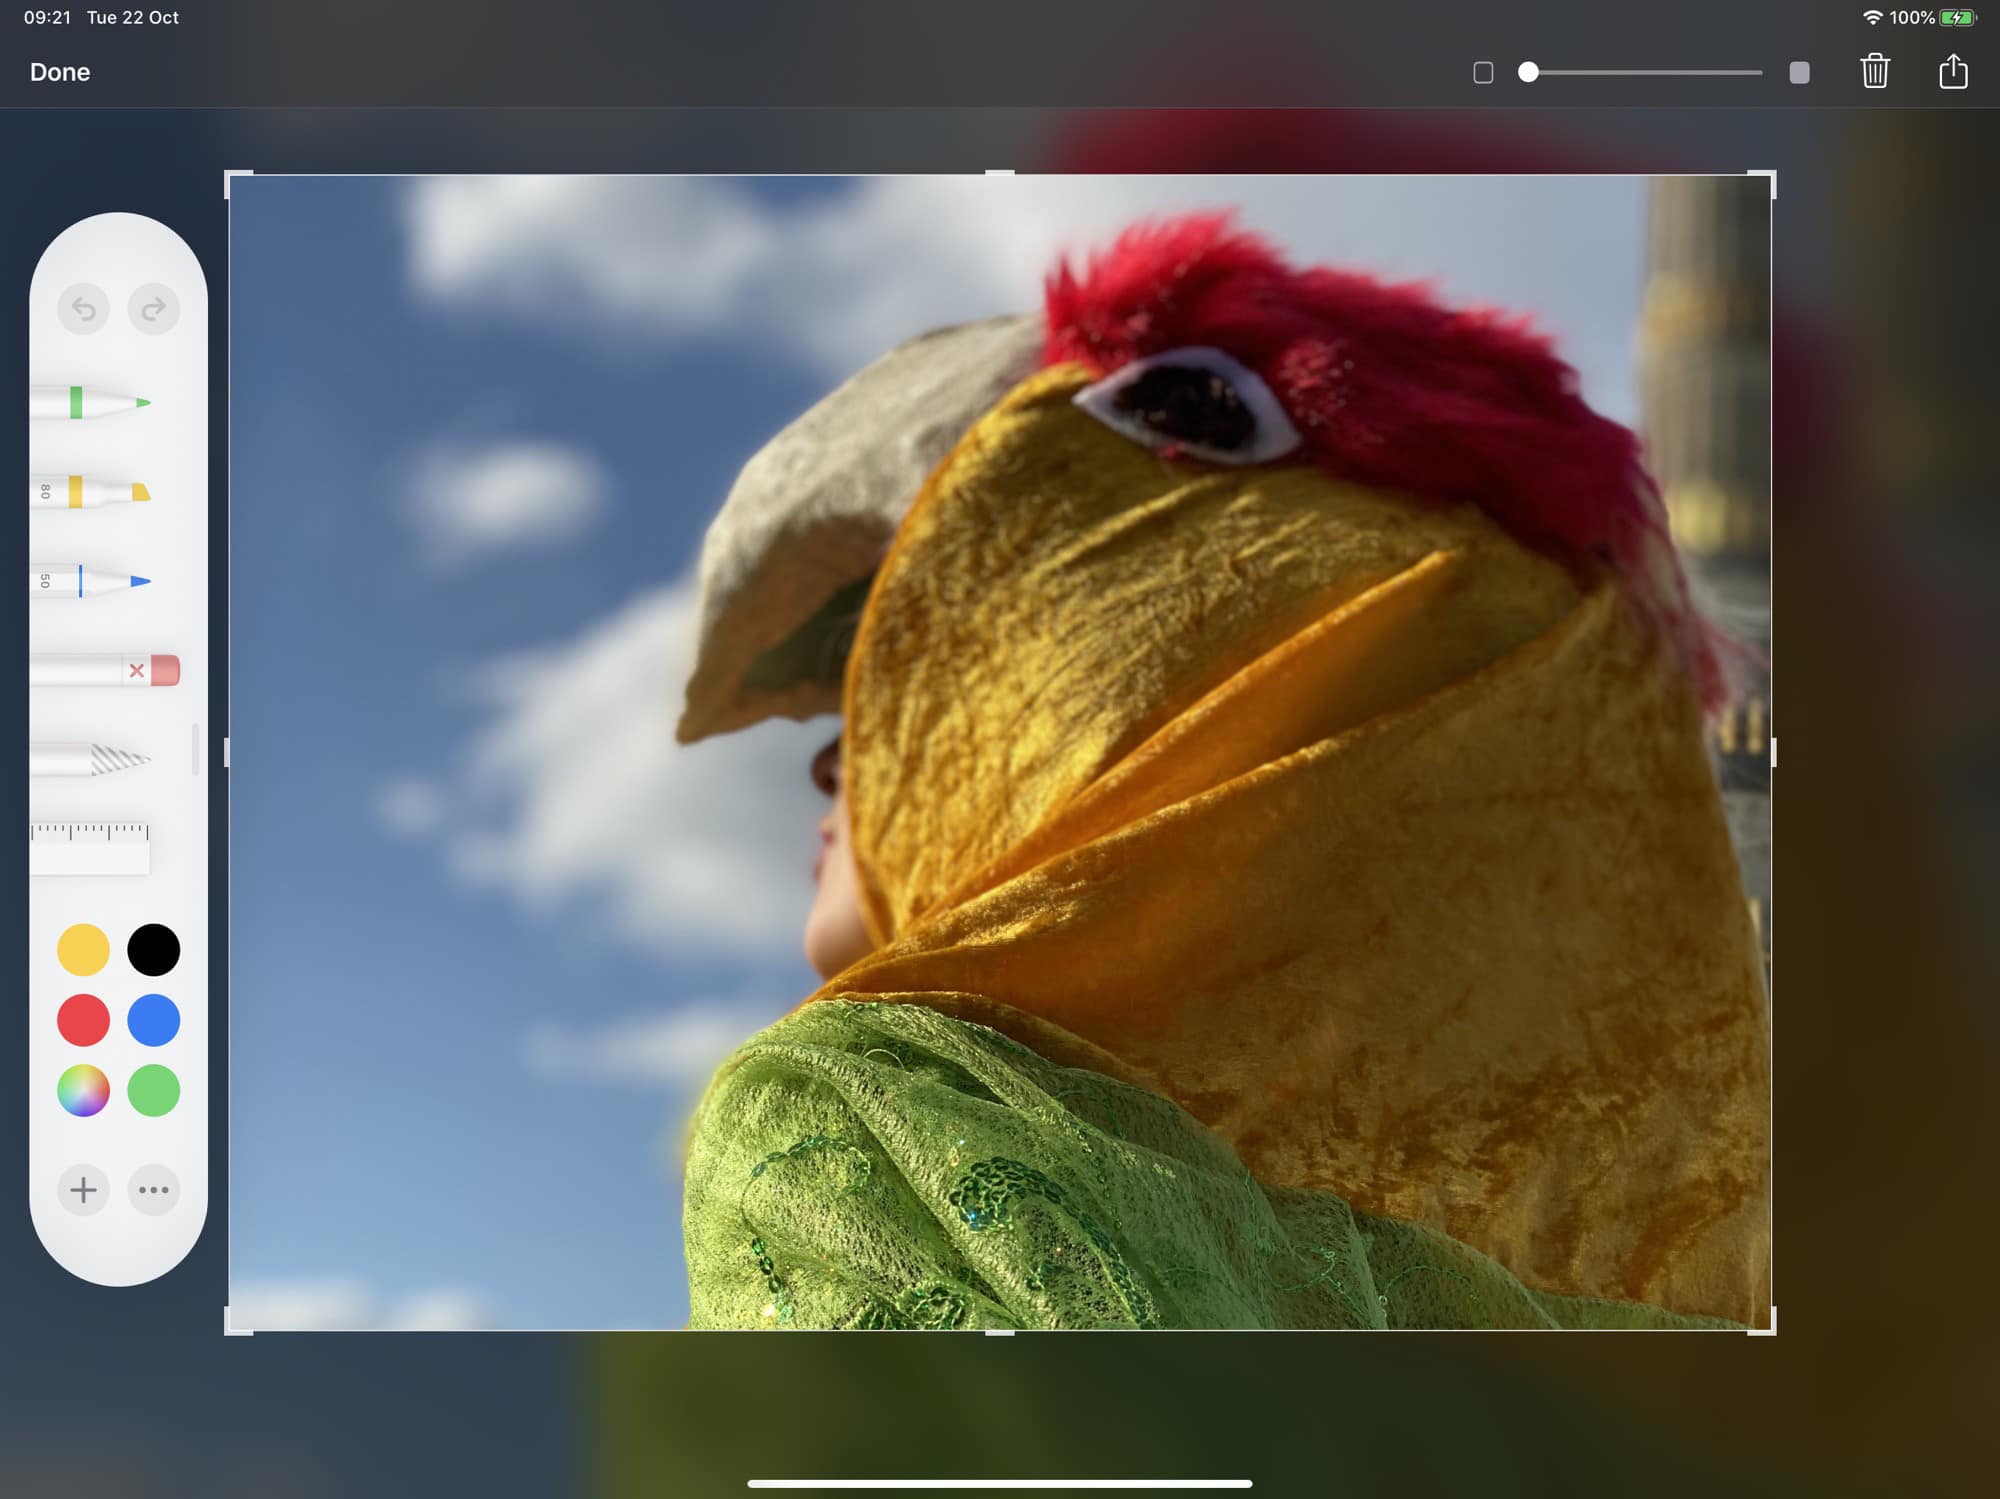 The colorful new screenshot markup tools in iOS 13